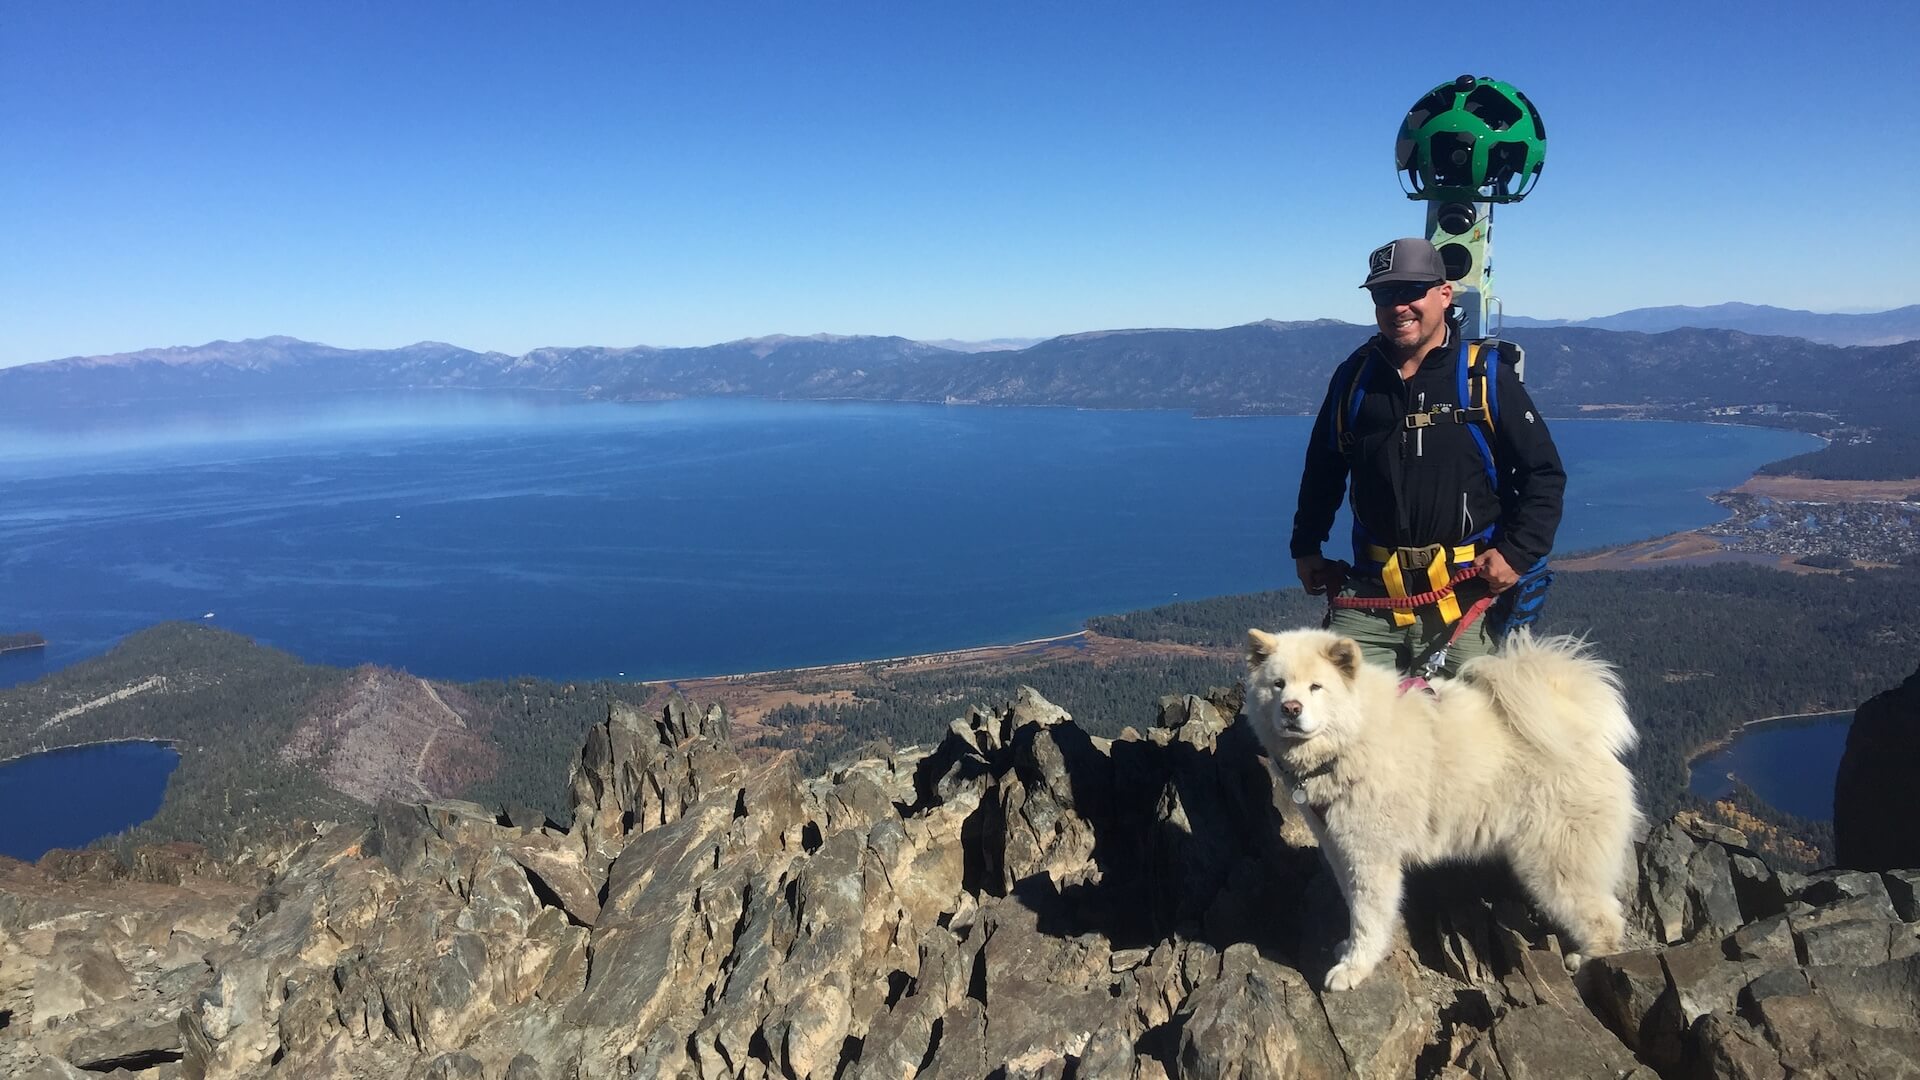 Top of Mt Tallac with the Google Trekker / LTVA